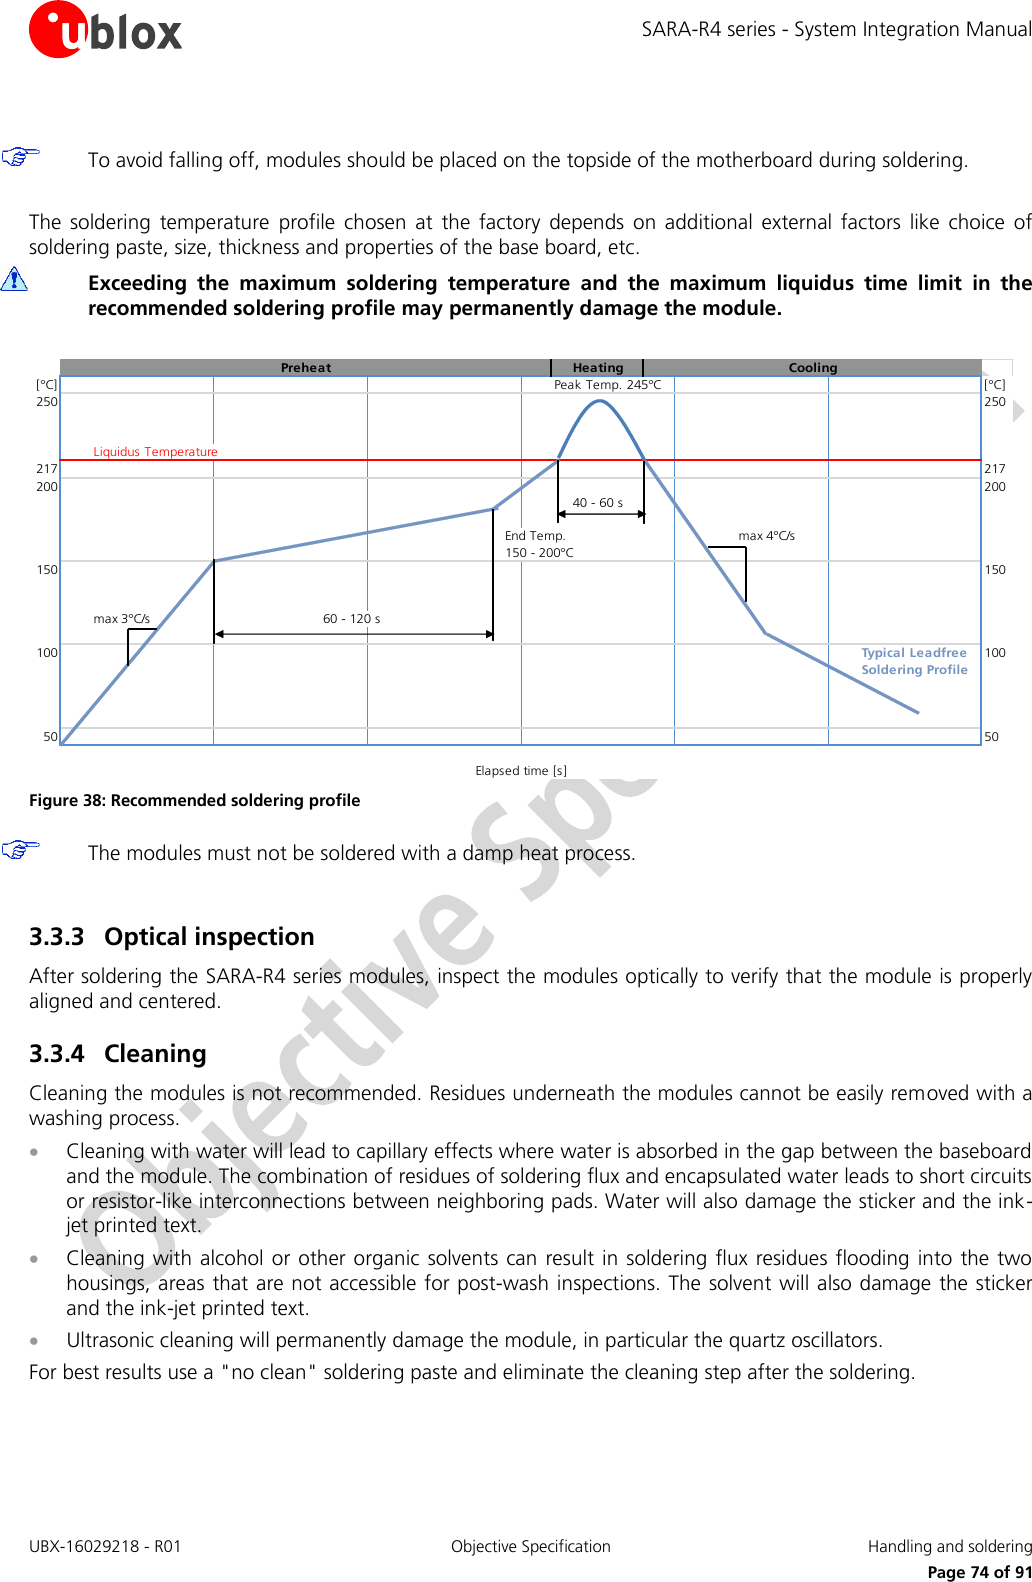 SARA-R4 series - System Integration Manual UBX-16029218 - R01  Objective Specification  Handling and soldering     Page 74 of 91   To avoid falling off, modules should be placed on the topside of the motherboard during soldering.  The  soldering  temperature  profile  chosen  at  the  factory  depends  on  additional  external  factors  like  choice  of soldering paste, size, thickness and properties of the base board, etc.   Exceeding  the  maximum  soldering  temperature  and  the  maximum  liquidus  time  limit  in  the recommended soldering profile may permanently damage the module.  Preheat Heating Cooling[°C] Peak Temp. 245°C [°C]250 250Liquidus Temperature217 217200 20040 - 60 sEnd Temp.max 4°C/s150 - 200°C150 150max 3°C/s60 - 120 s100 Typical Leadfree 100Soldering Profile50 50Elapsed time [s] Figure 38: Recommended soldering profile  The modules must not be soldered with a damp heat process.  3.3.3 Optical inspection After soldering the SARA-R4 series modules, inspect the modules optically to verify that the module is properly aligned and centered. 3.3.4 Cleaning Cleaning the modules is not recommended. Residues underneath the modules cannot be easily removed with a washing process.  Cleaning with water will lead to capillary effects where water is absorbed in the gap between the baseboard and the module. The combination of residues of soldering flux and encapsulated water leads to short circuits or resistor-like interconnections between neighboring pads. Water will also damage the sticker and the ink-jet printed text.  Cleaning with alcohol  or other organic  solvents can result in  soldering flux  residues flooding  into  the  two housings, areas that are not accessible for post-wash inspections. The solvent will also damage the sticker and the ink-jet printed text.  Ultrasonic cleaning will permanently damage the module, in particular the quartz oscillators. For best results use a &quot;no clean&quot; soldering paste and eliminate the cleaning step after the soldering. 